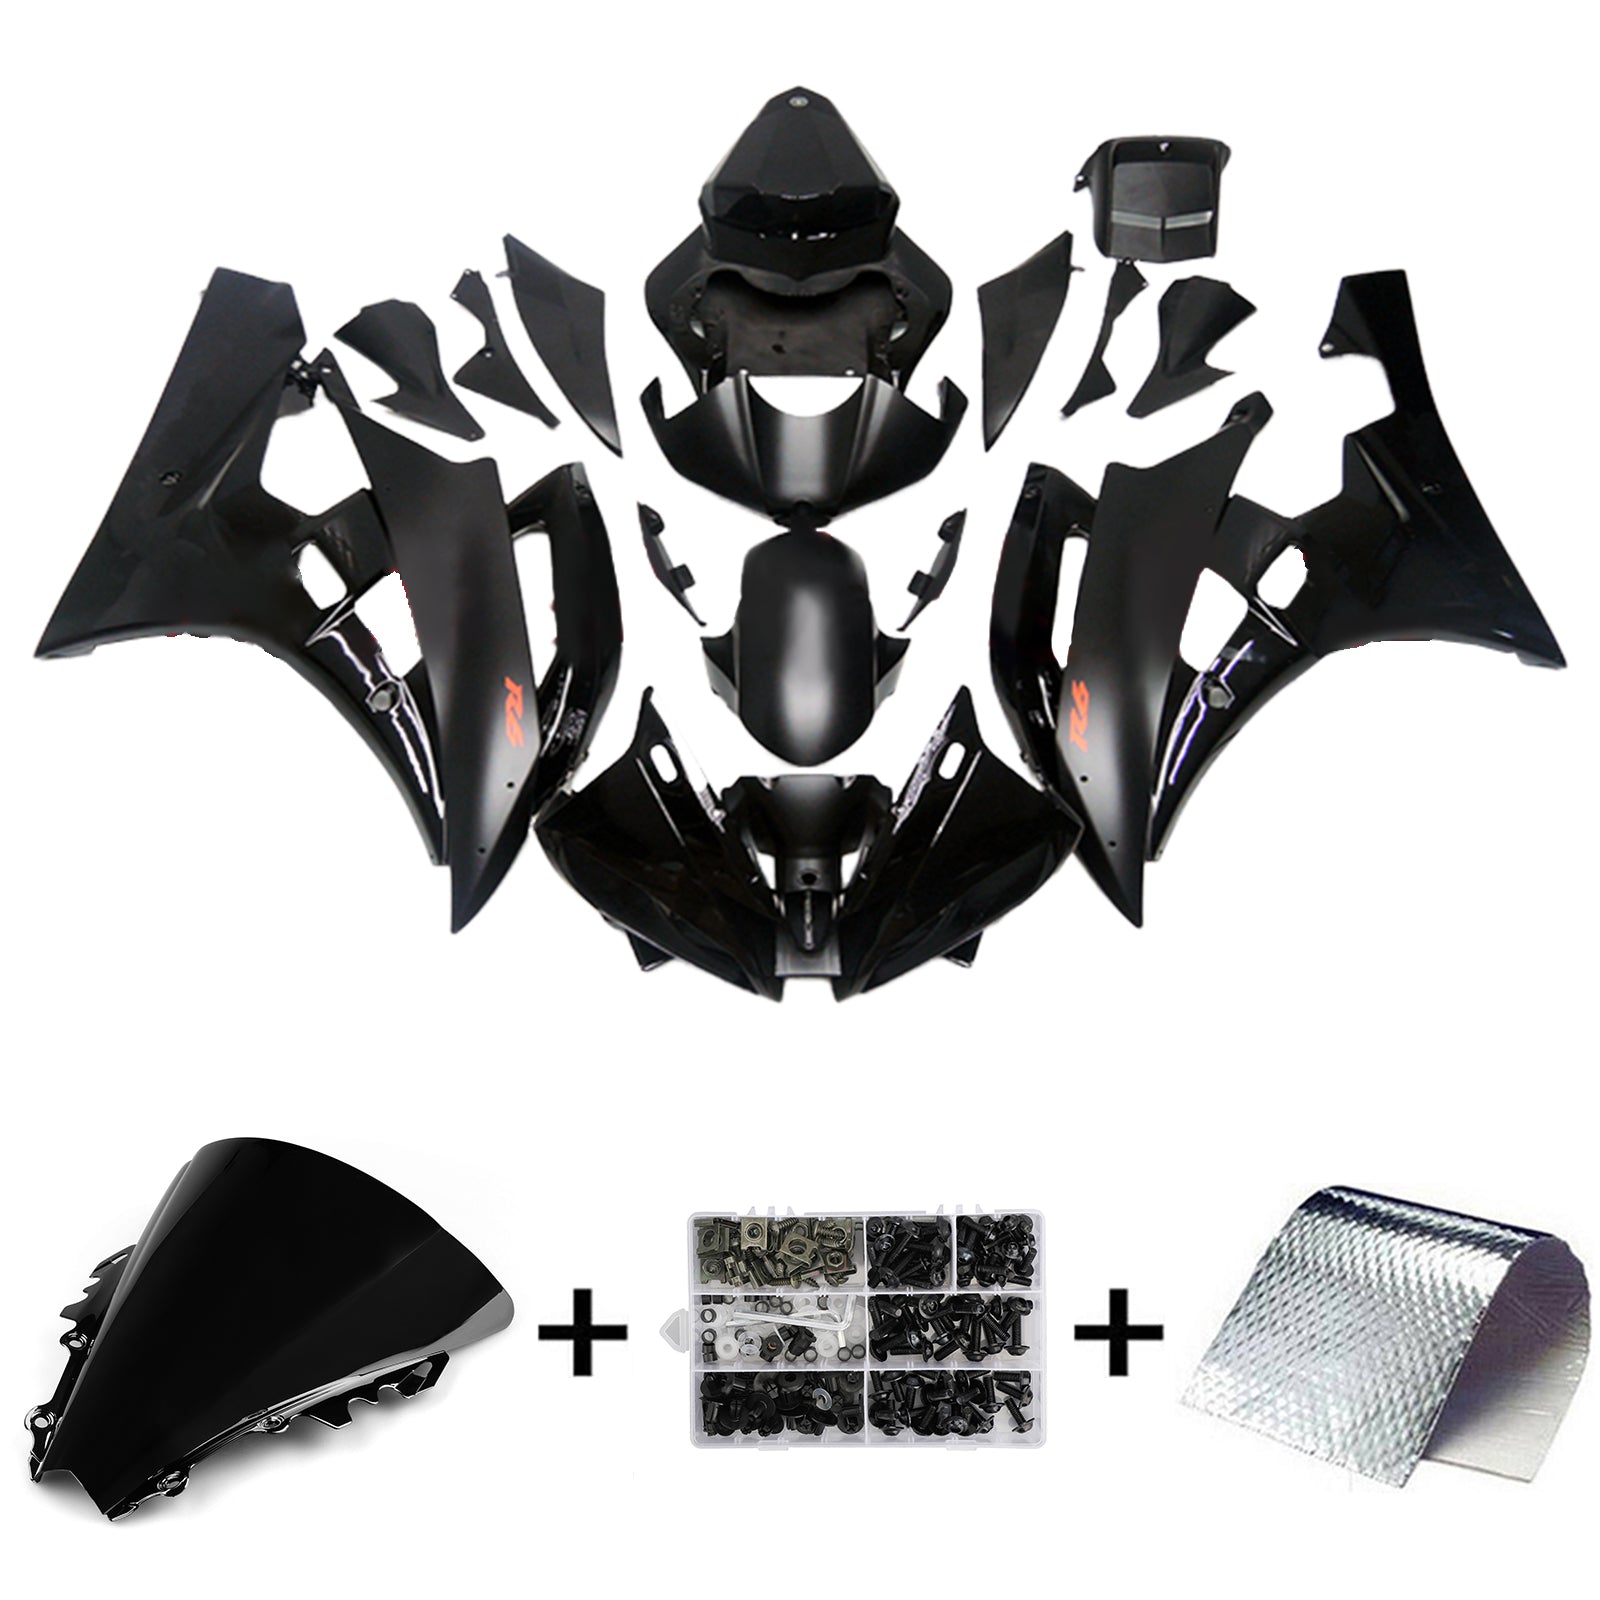 Amotopart Kit carena carrozzeria in plastica ABS per Yamaha YZF 600 R6 2006-2007